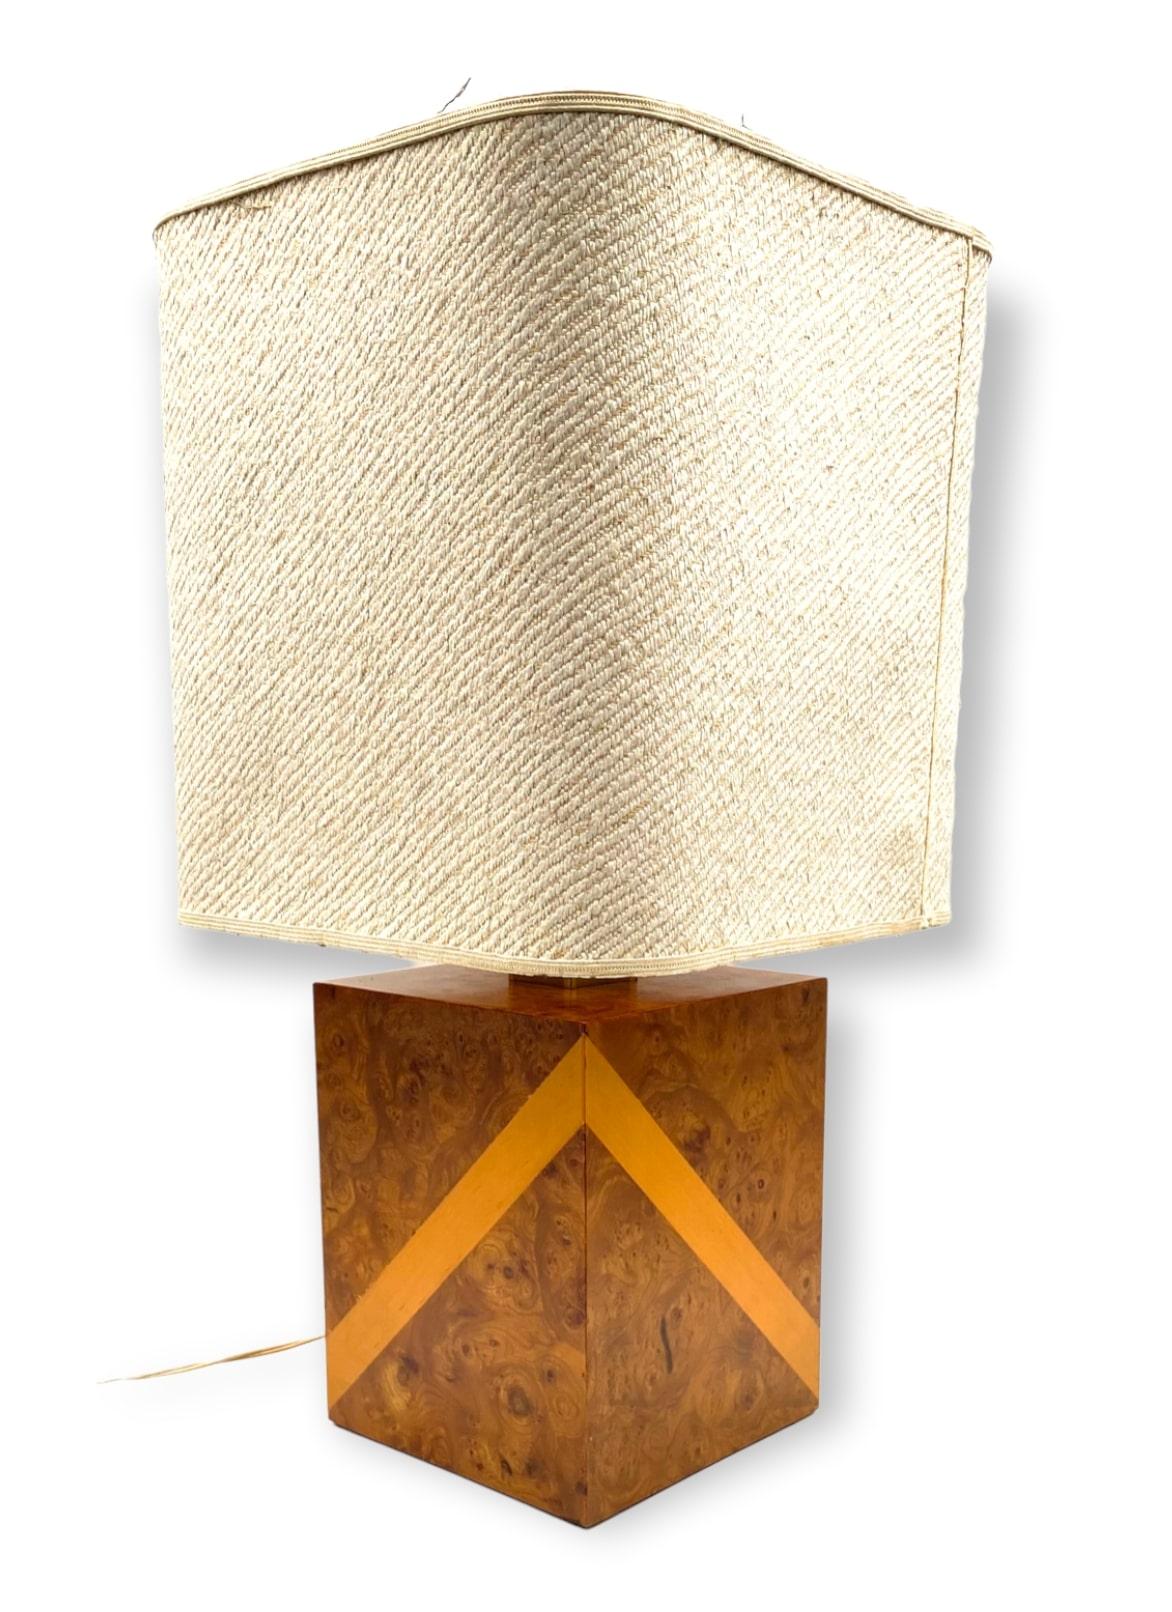 Hollywood Regency Cubic Wood and Brass Table Lamp, Italy, 1970s For Sale 6